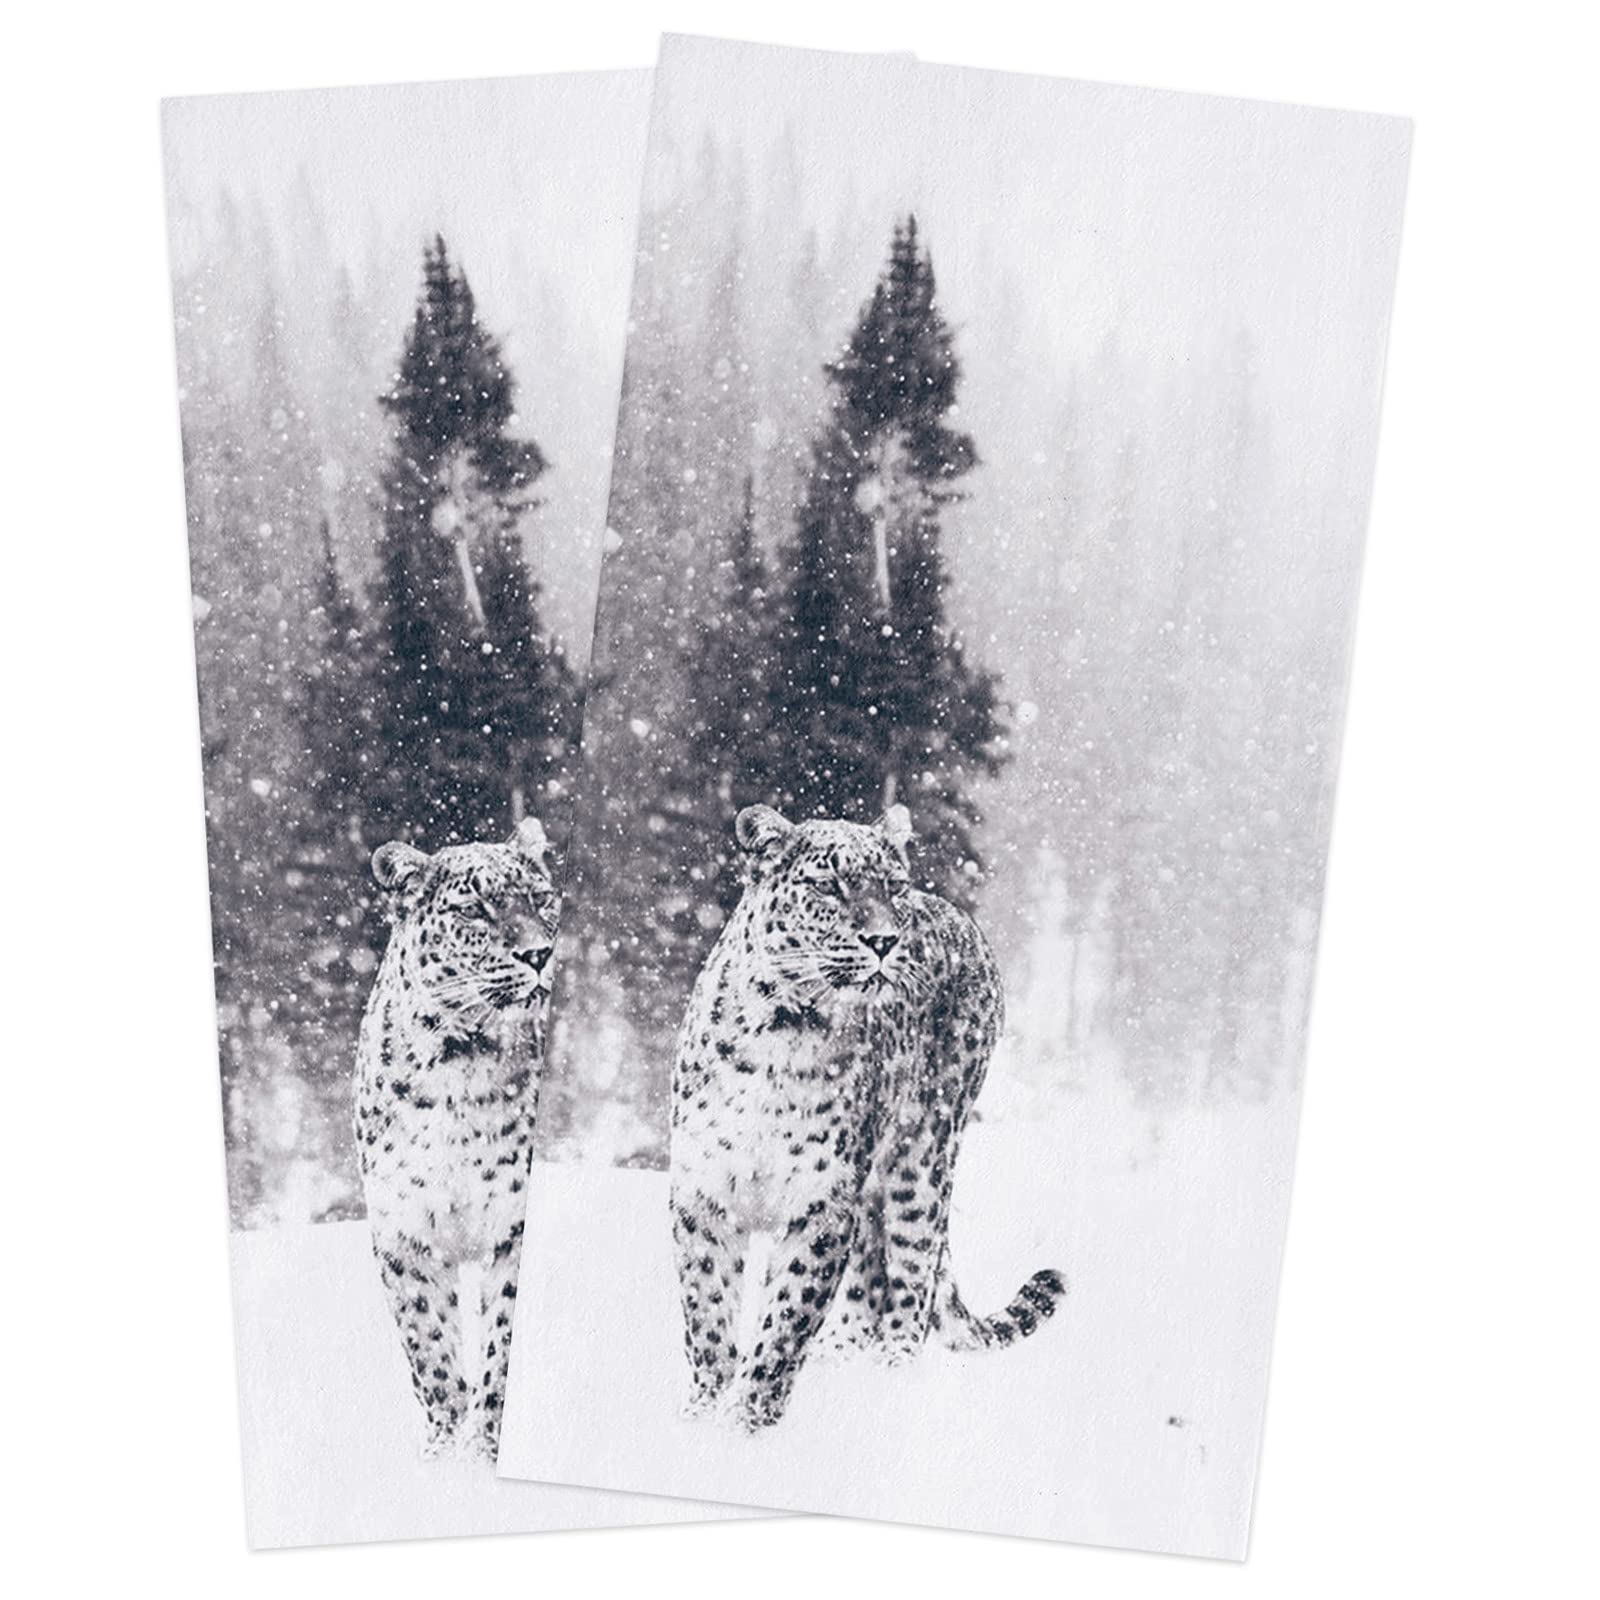 Cotton Kitchen Towels 2 Pack 18 X 28 Inch Leopard Nature Forest Super Soft Tea Towels/Bar Towels/Hand Towels Absorbent Reusable Cleaning Cloth Dish Towels for Kitchen, Bathroom